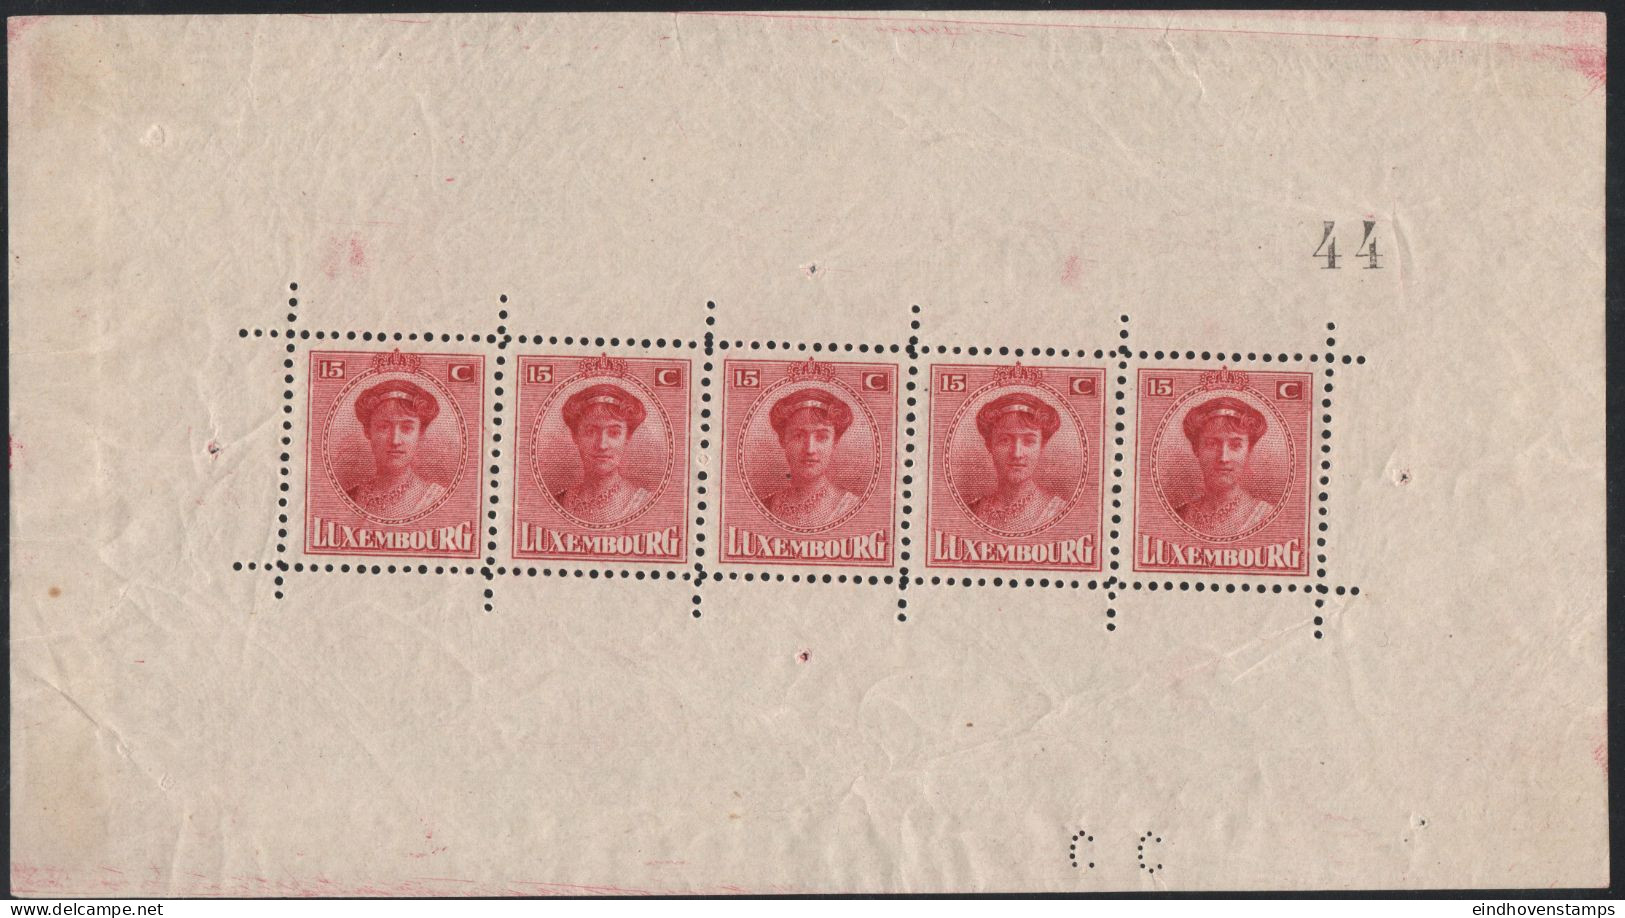 Luxemburg 1921 Minisheet Of 5 Stamps Charlotte MNH Left Side Ungommed, Some Usual Wrinkles Outside The Stamps - 1921-27 Charlotte Voorzijde